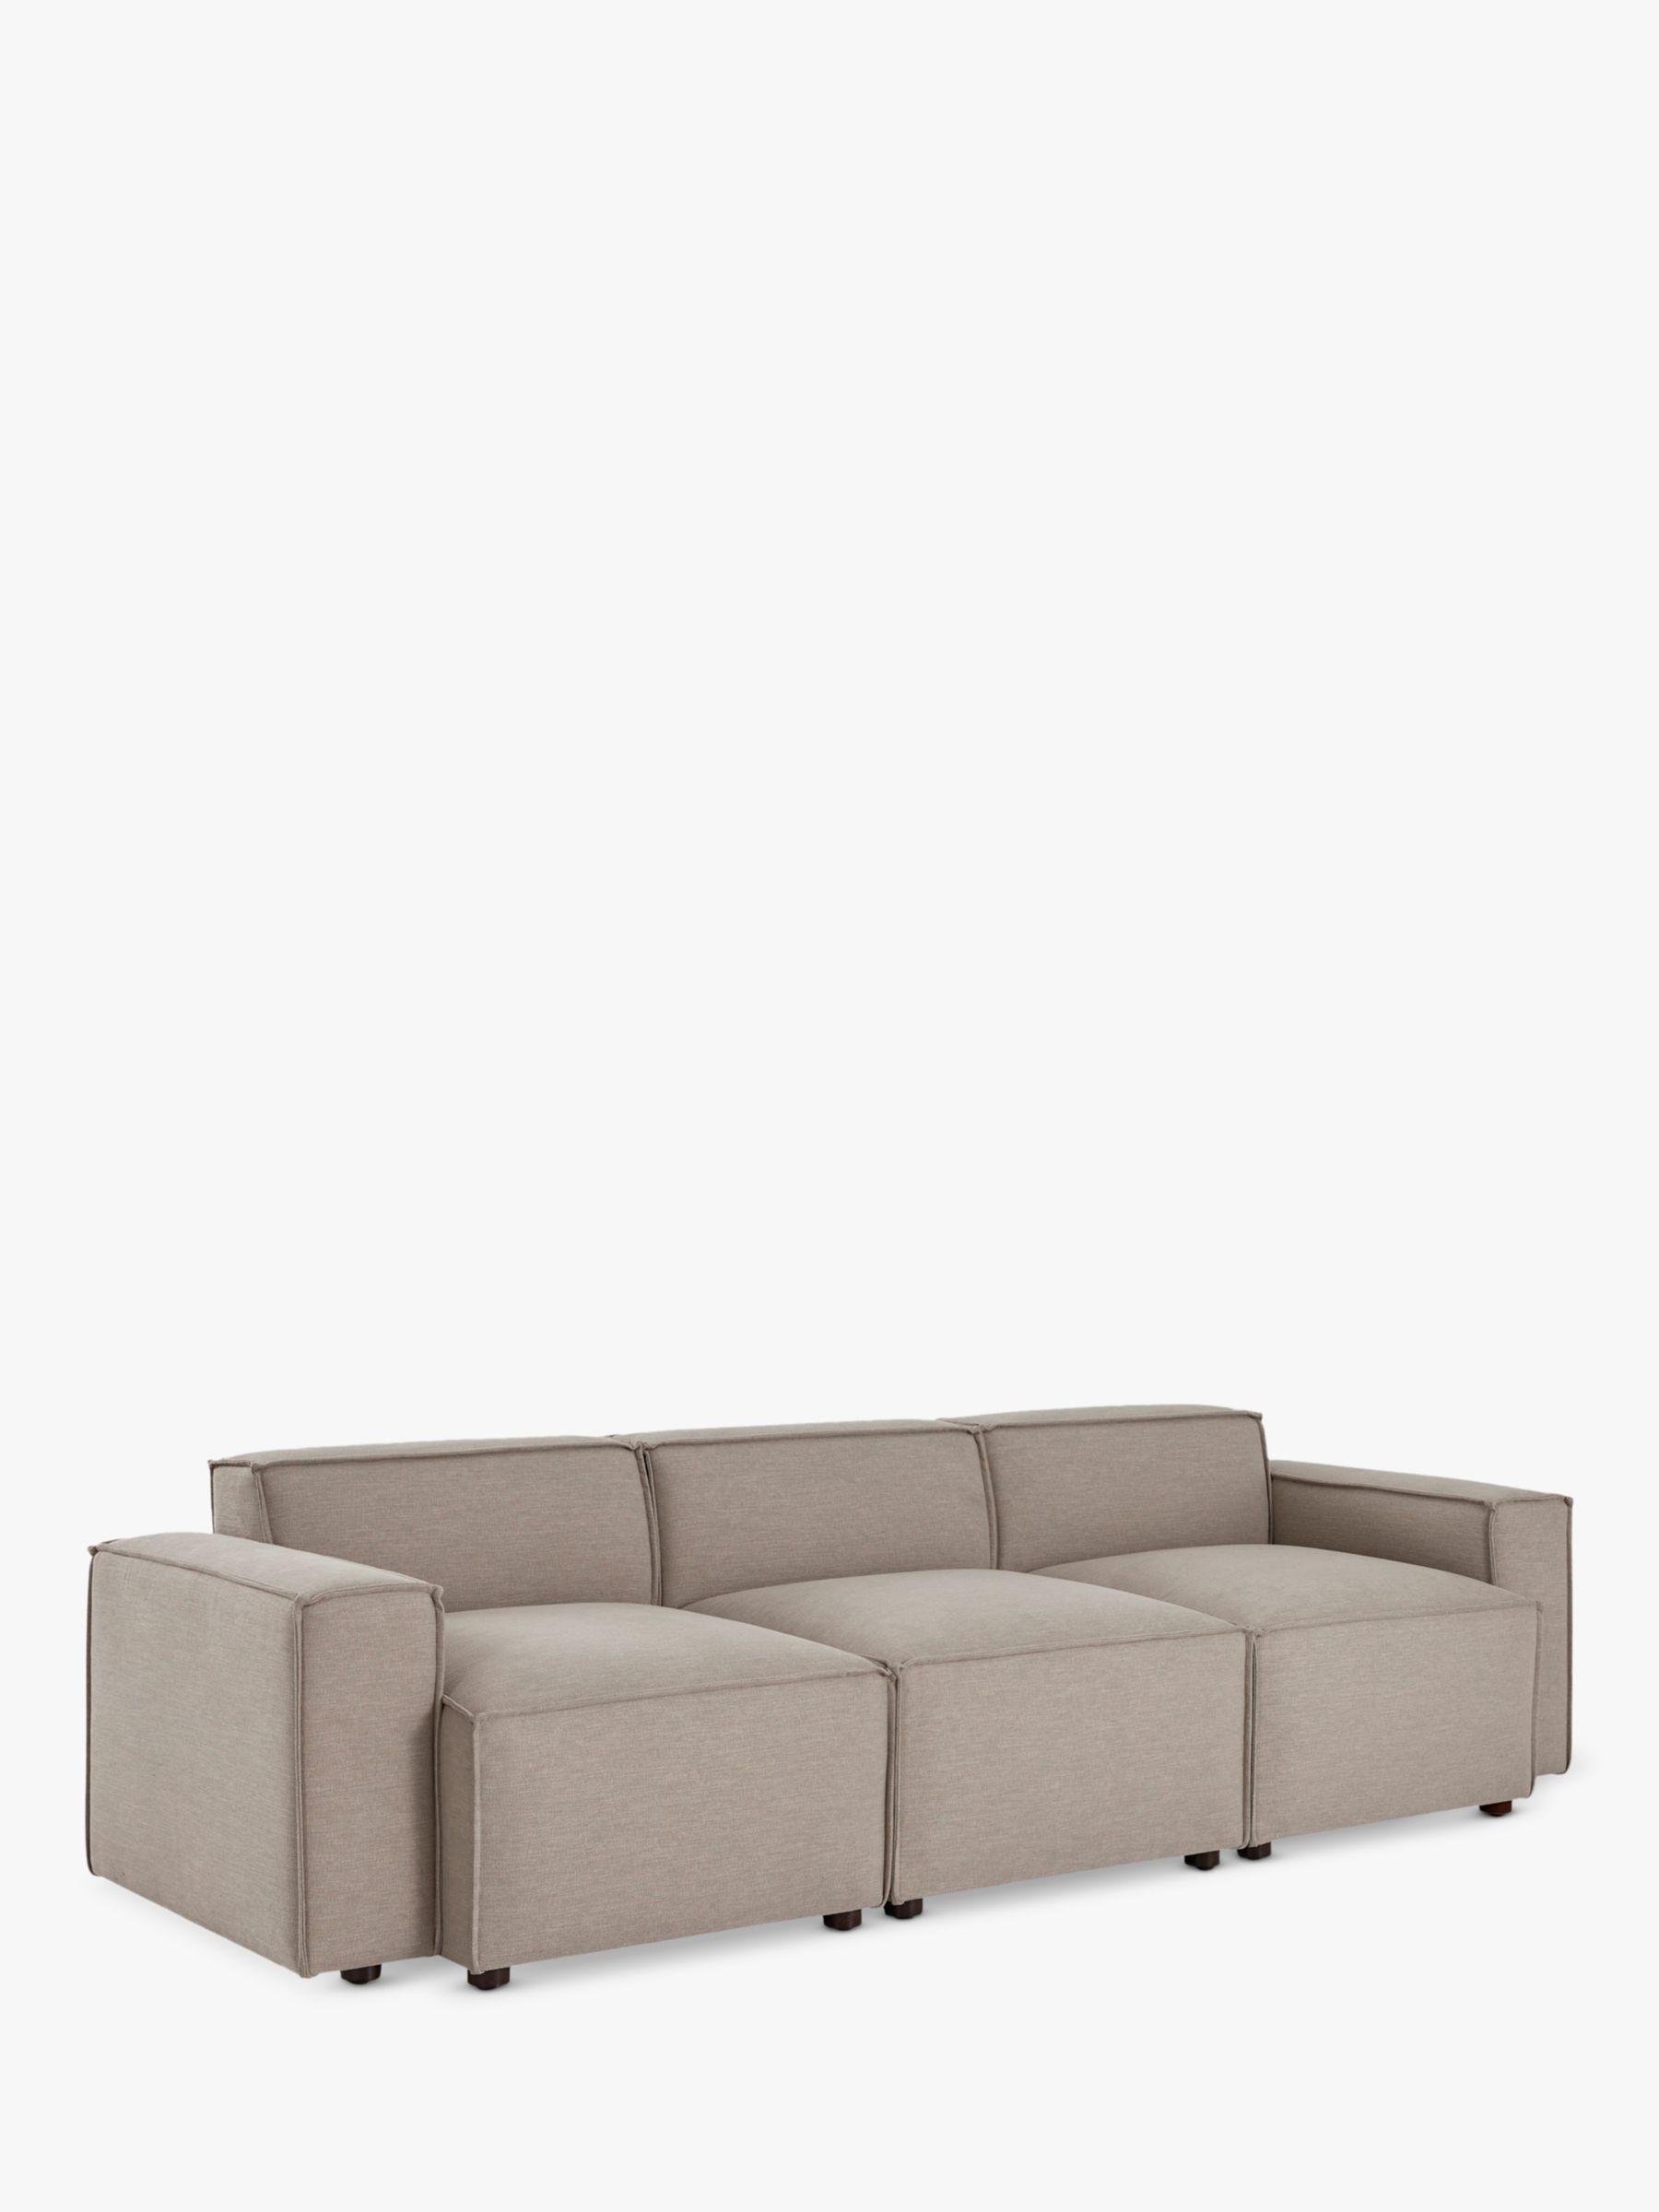 Photo of Swyft model 03 large 3 seater sofa